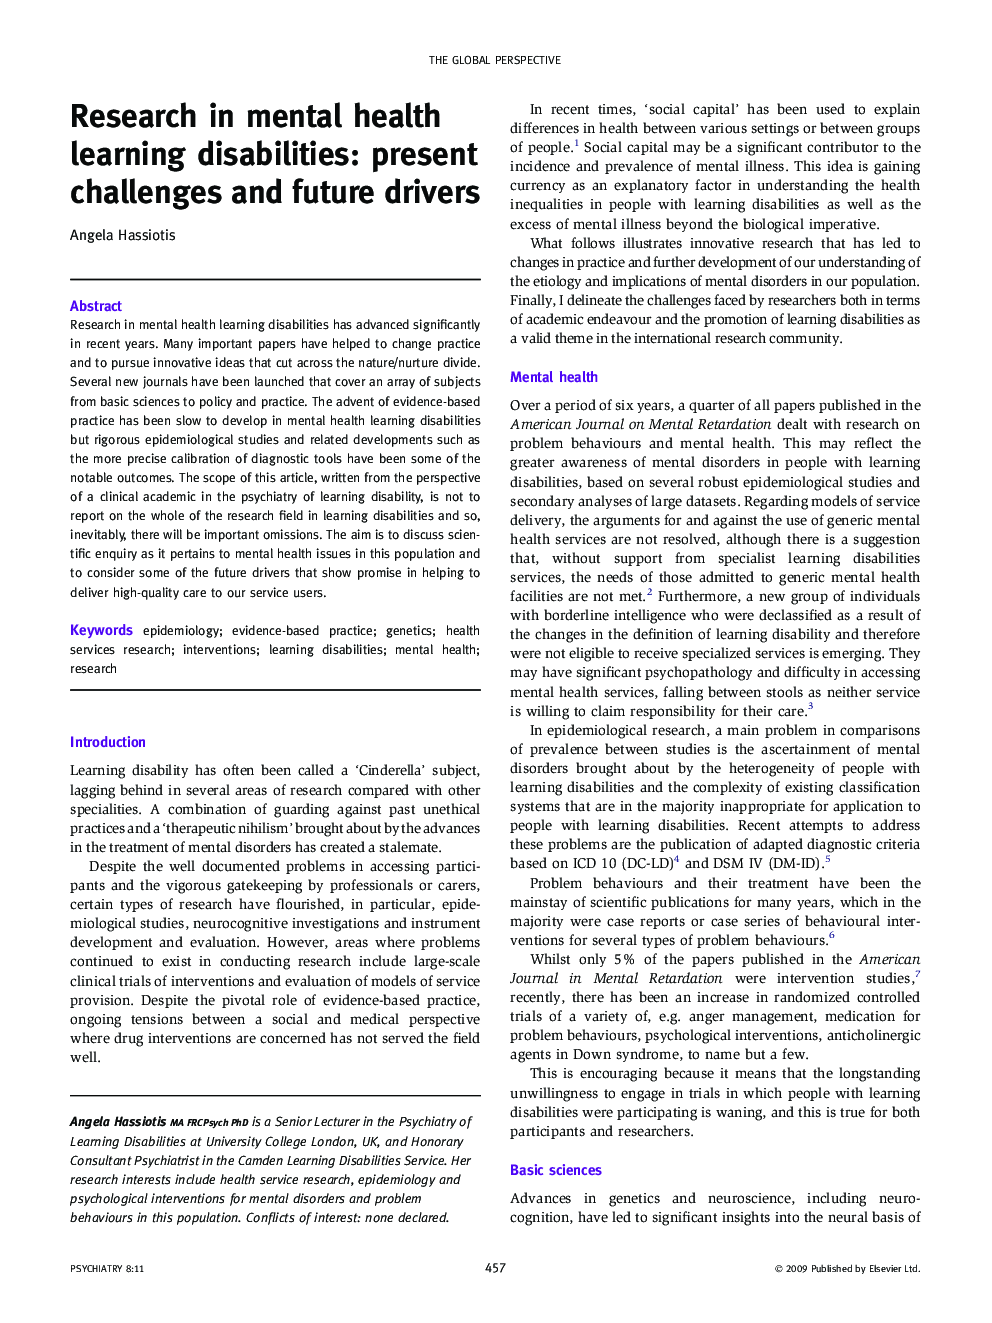 Research in mental health learning disabilities: present challenges and future drivers